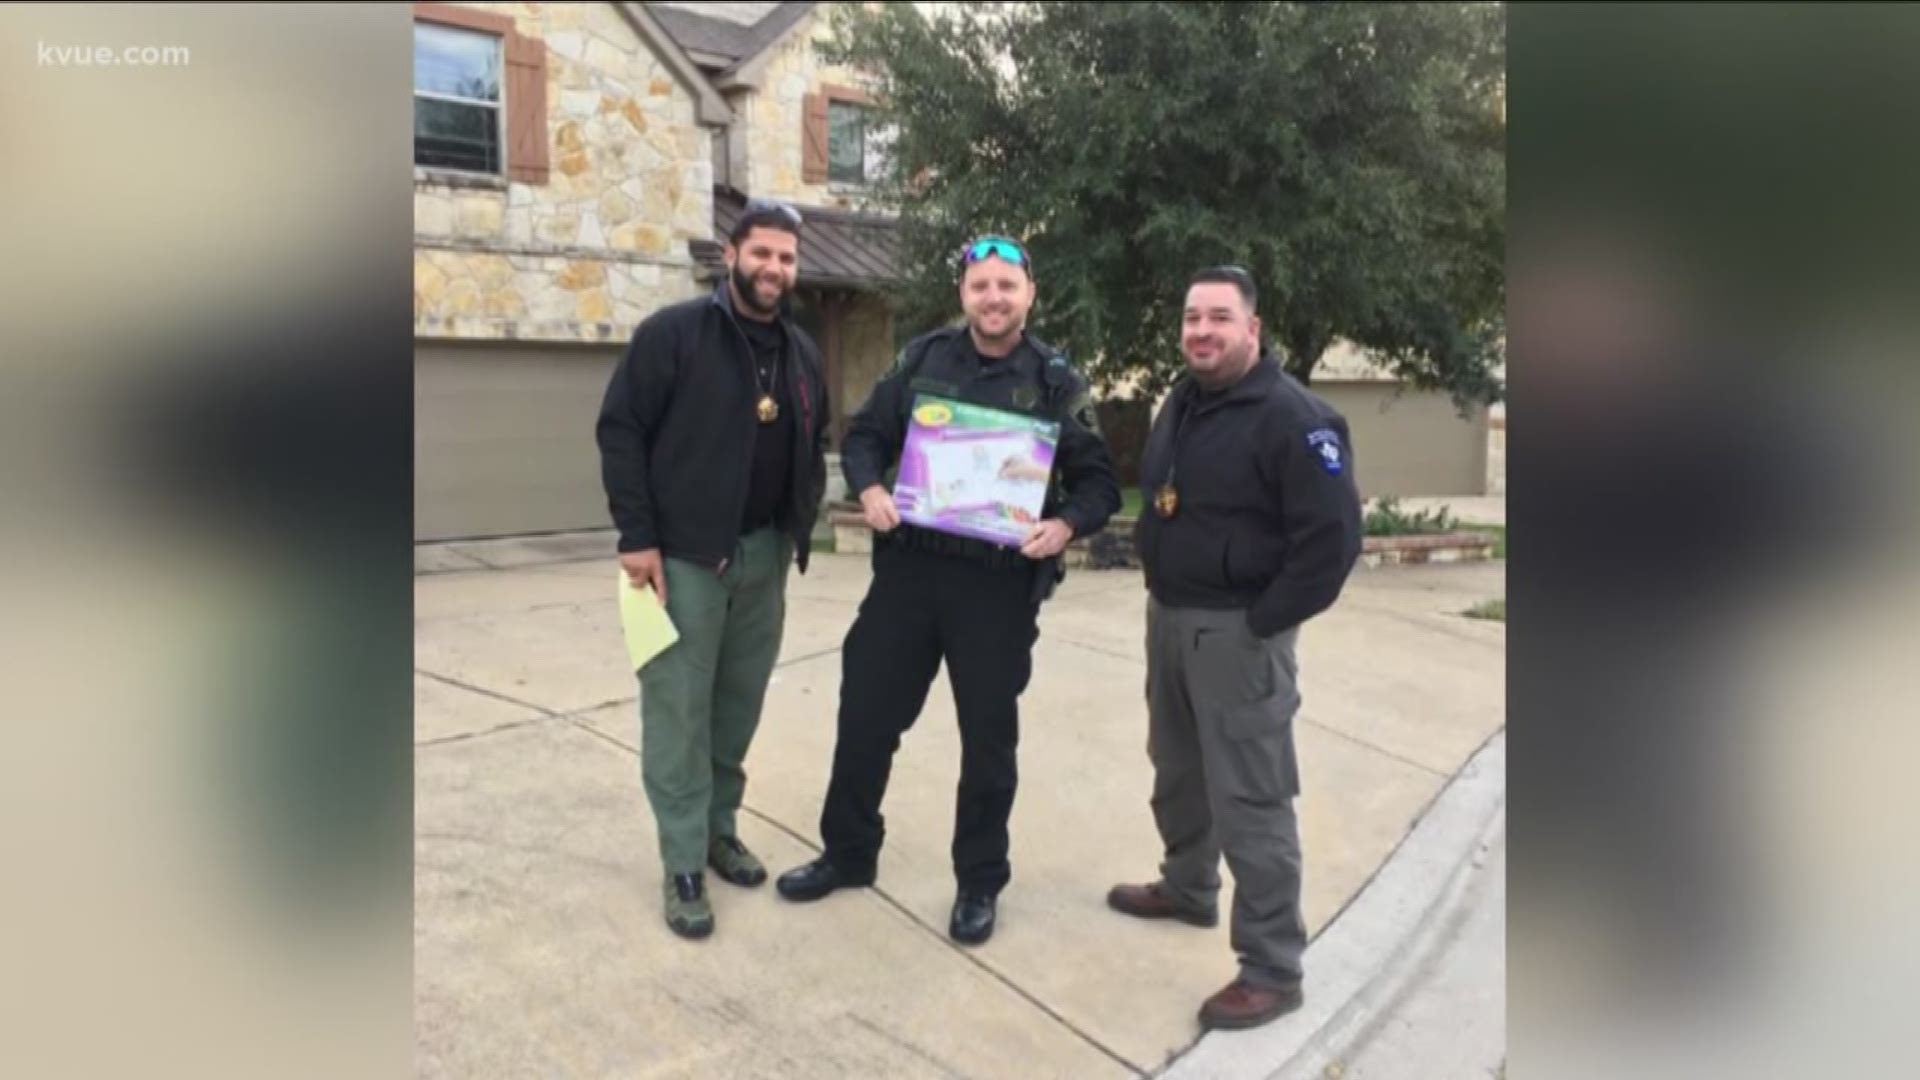 Williamson County Sheriff Robert Chody tweeted great news Thursday afternoon about returning packages to the Teravista residents who were robbed in early November.
STORY: http://www.kvue.com/news/local/williamson-county-sheriff-begins-returning-packages-s